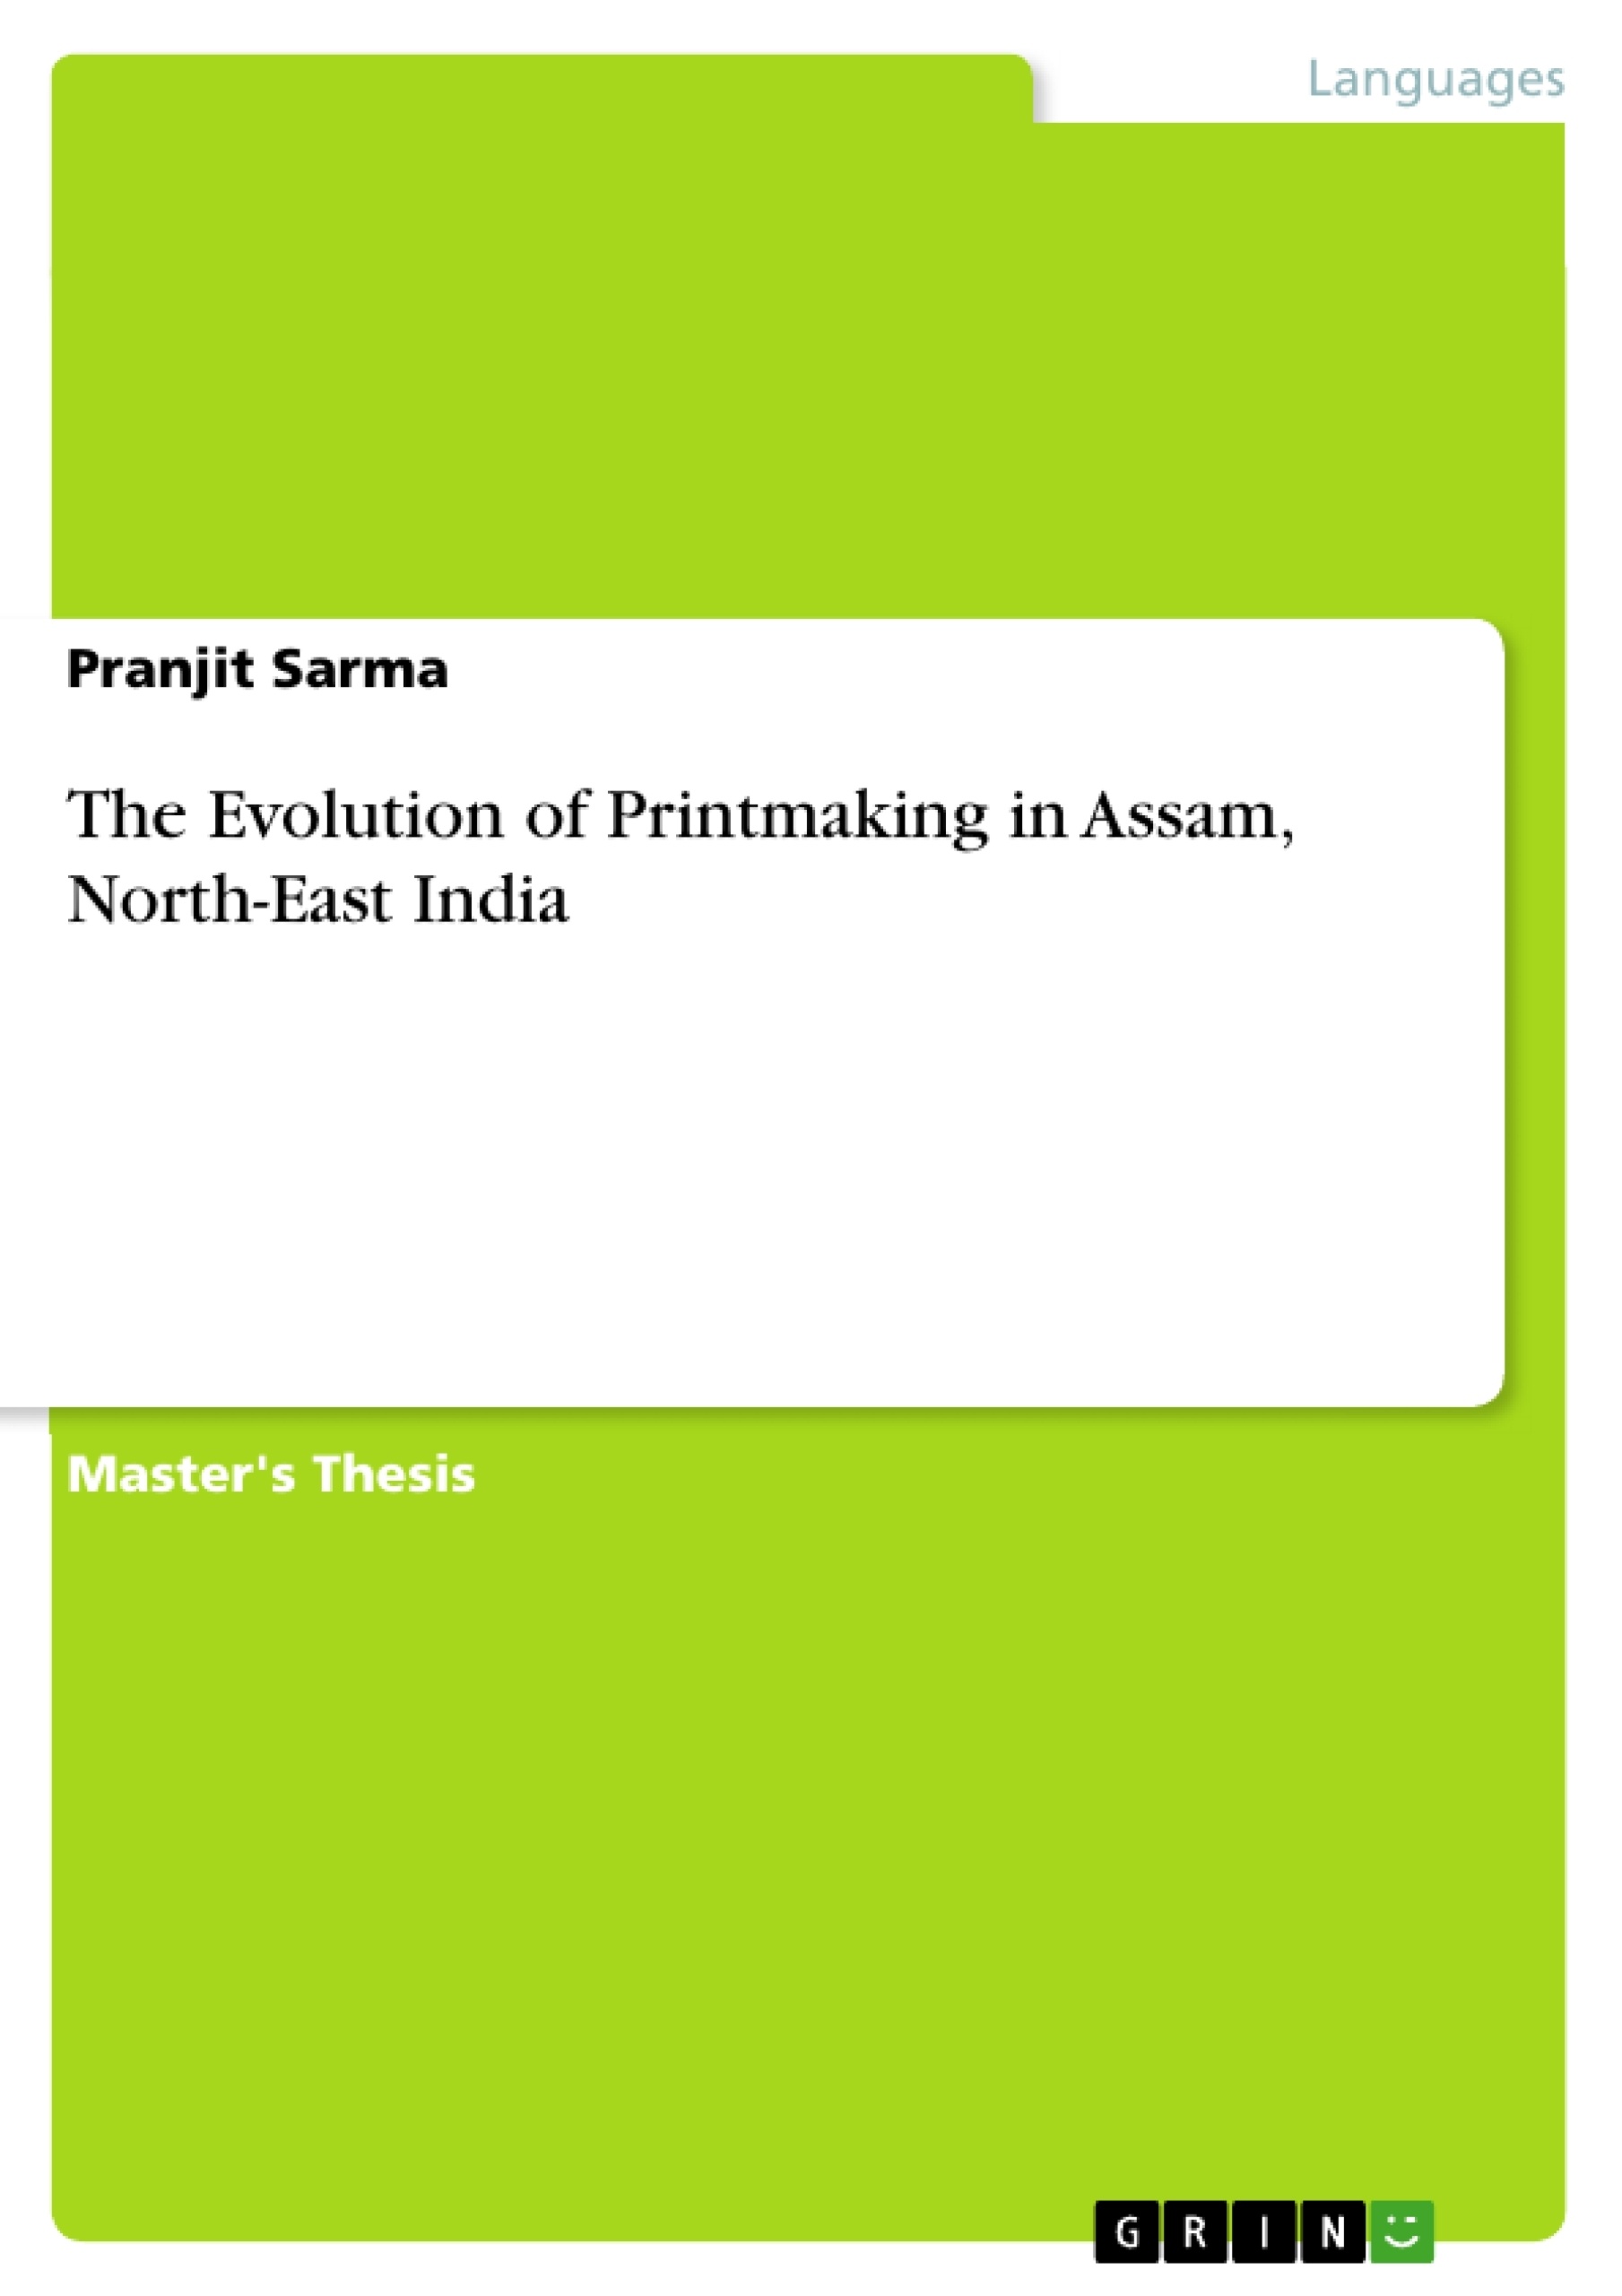 Title: The Evolution of Printmaking in Assam, North-East India